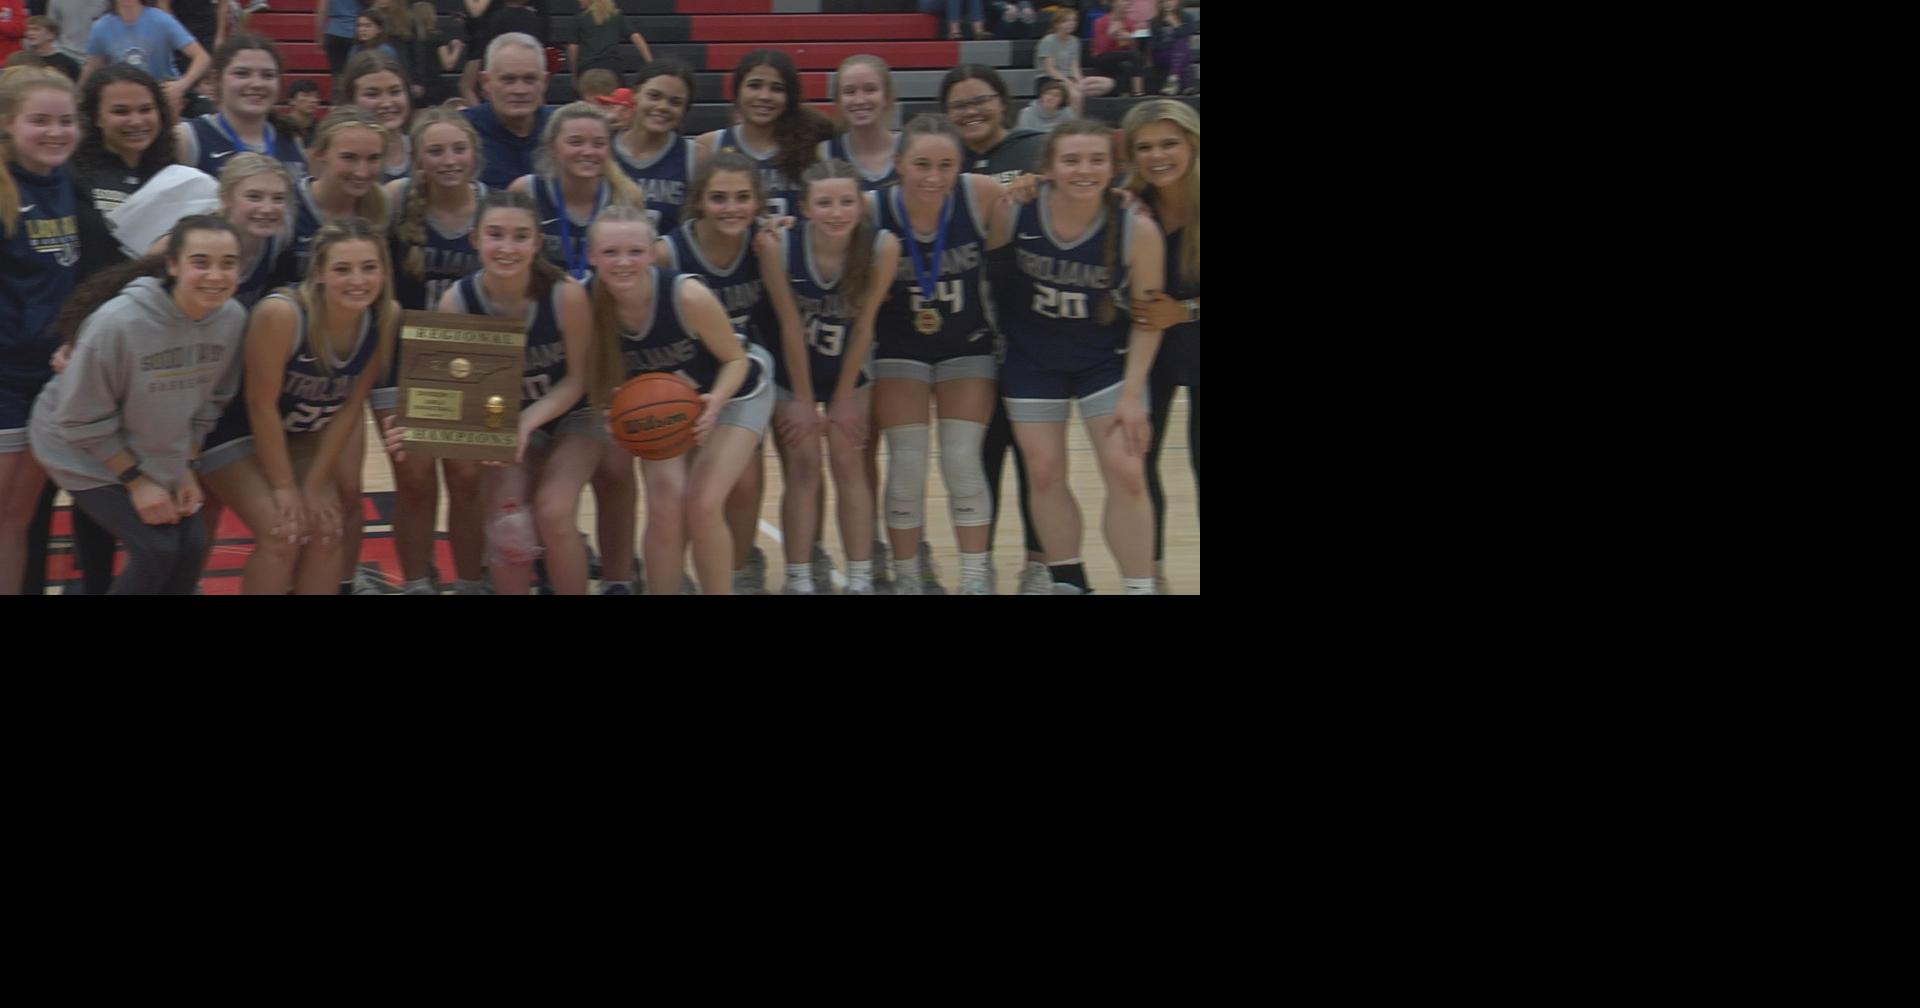 Bradley Central Soddy Daisy And Mcminn Central Girls Bring Home Region Titles Local News 1568